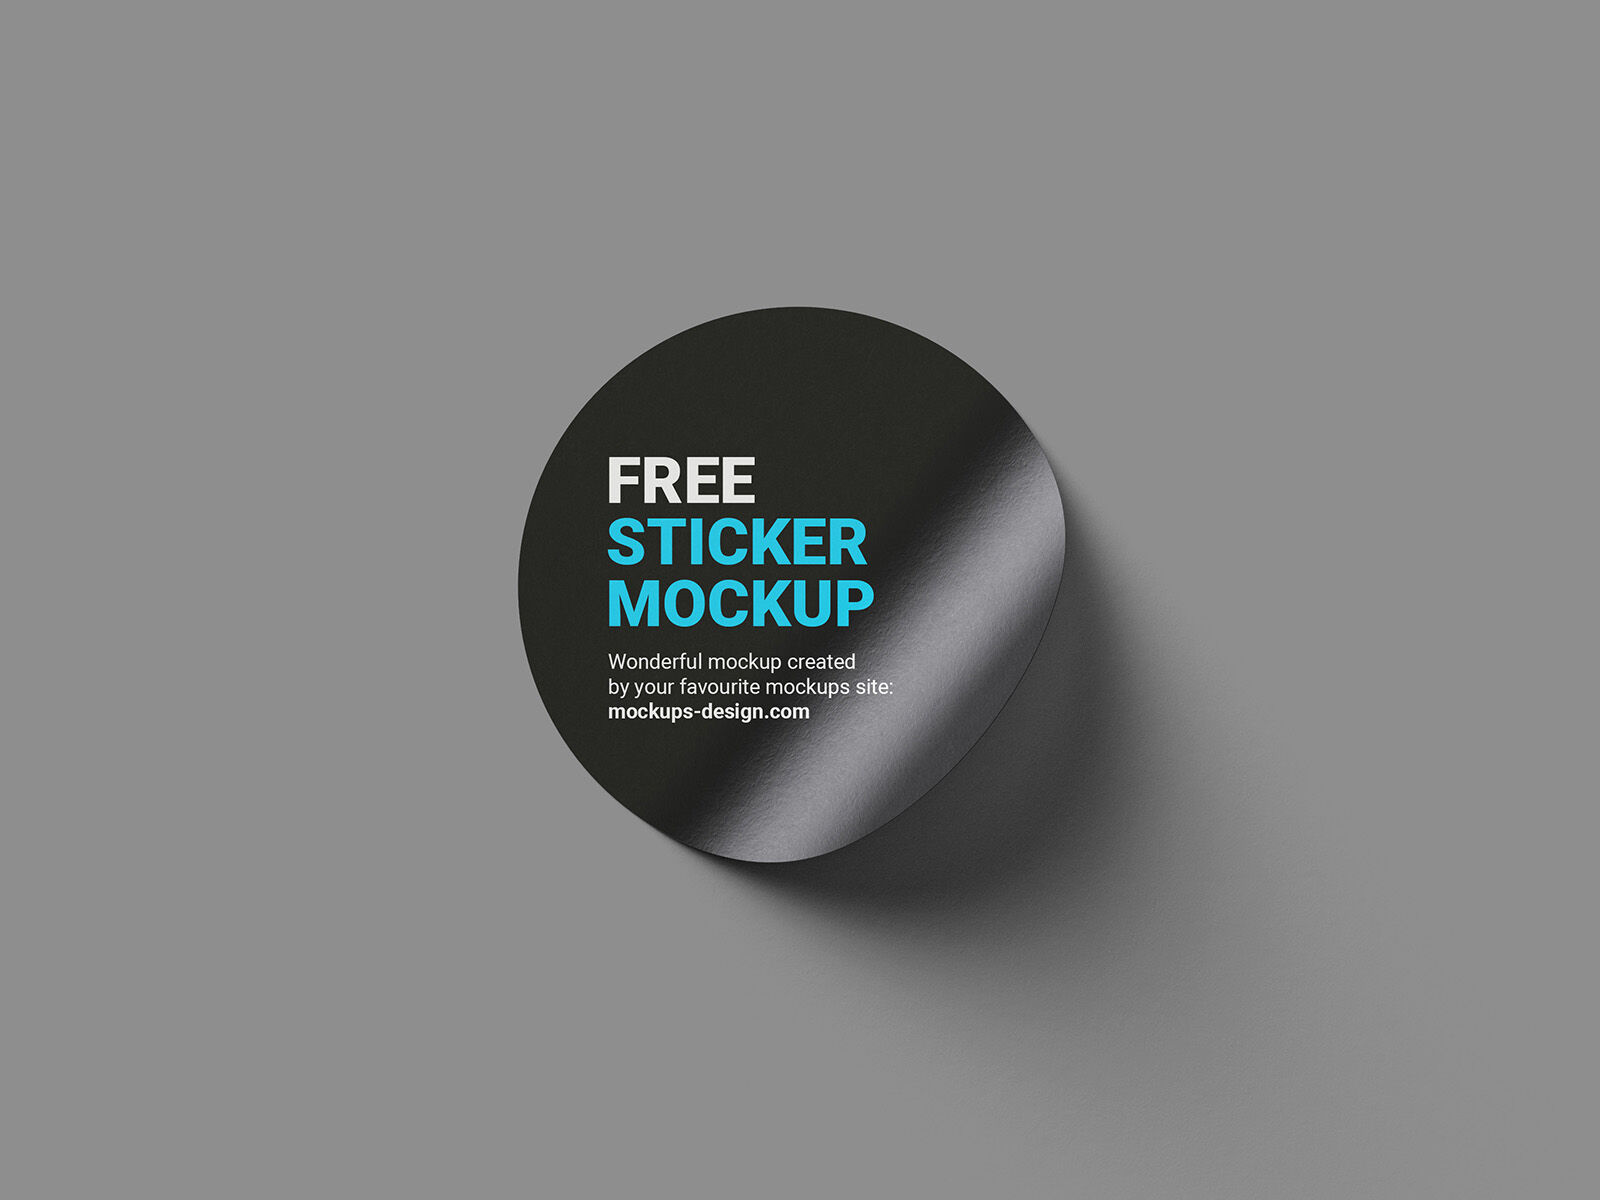 6 Mockups of Round Stickers in Different Views and Positions FREE PSD